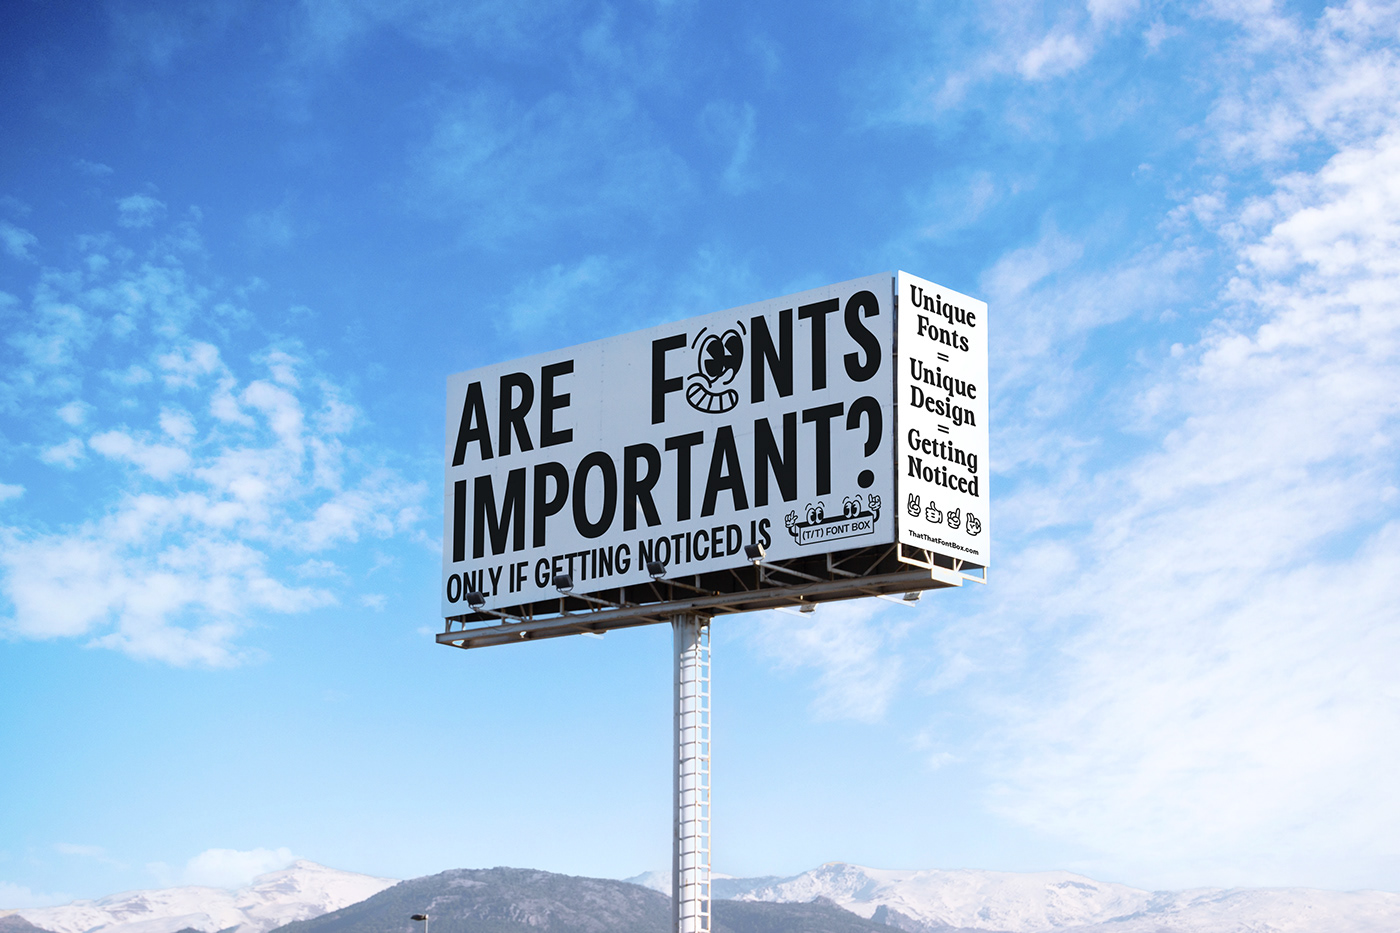 a billboard asking if fonts are important... only if standing out is